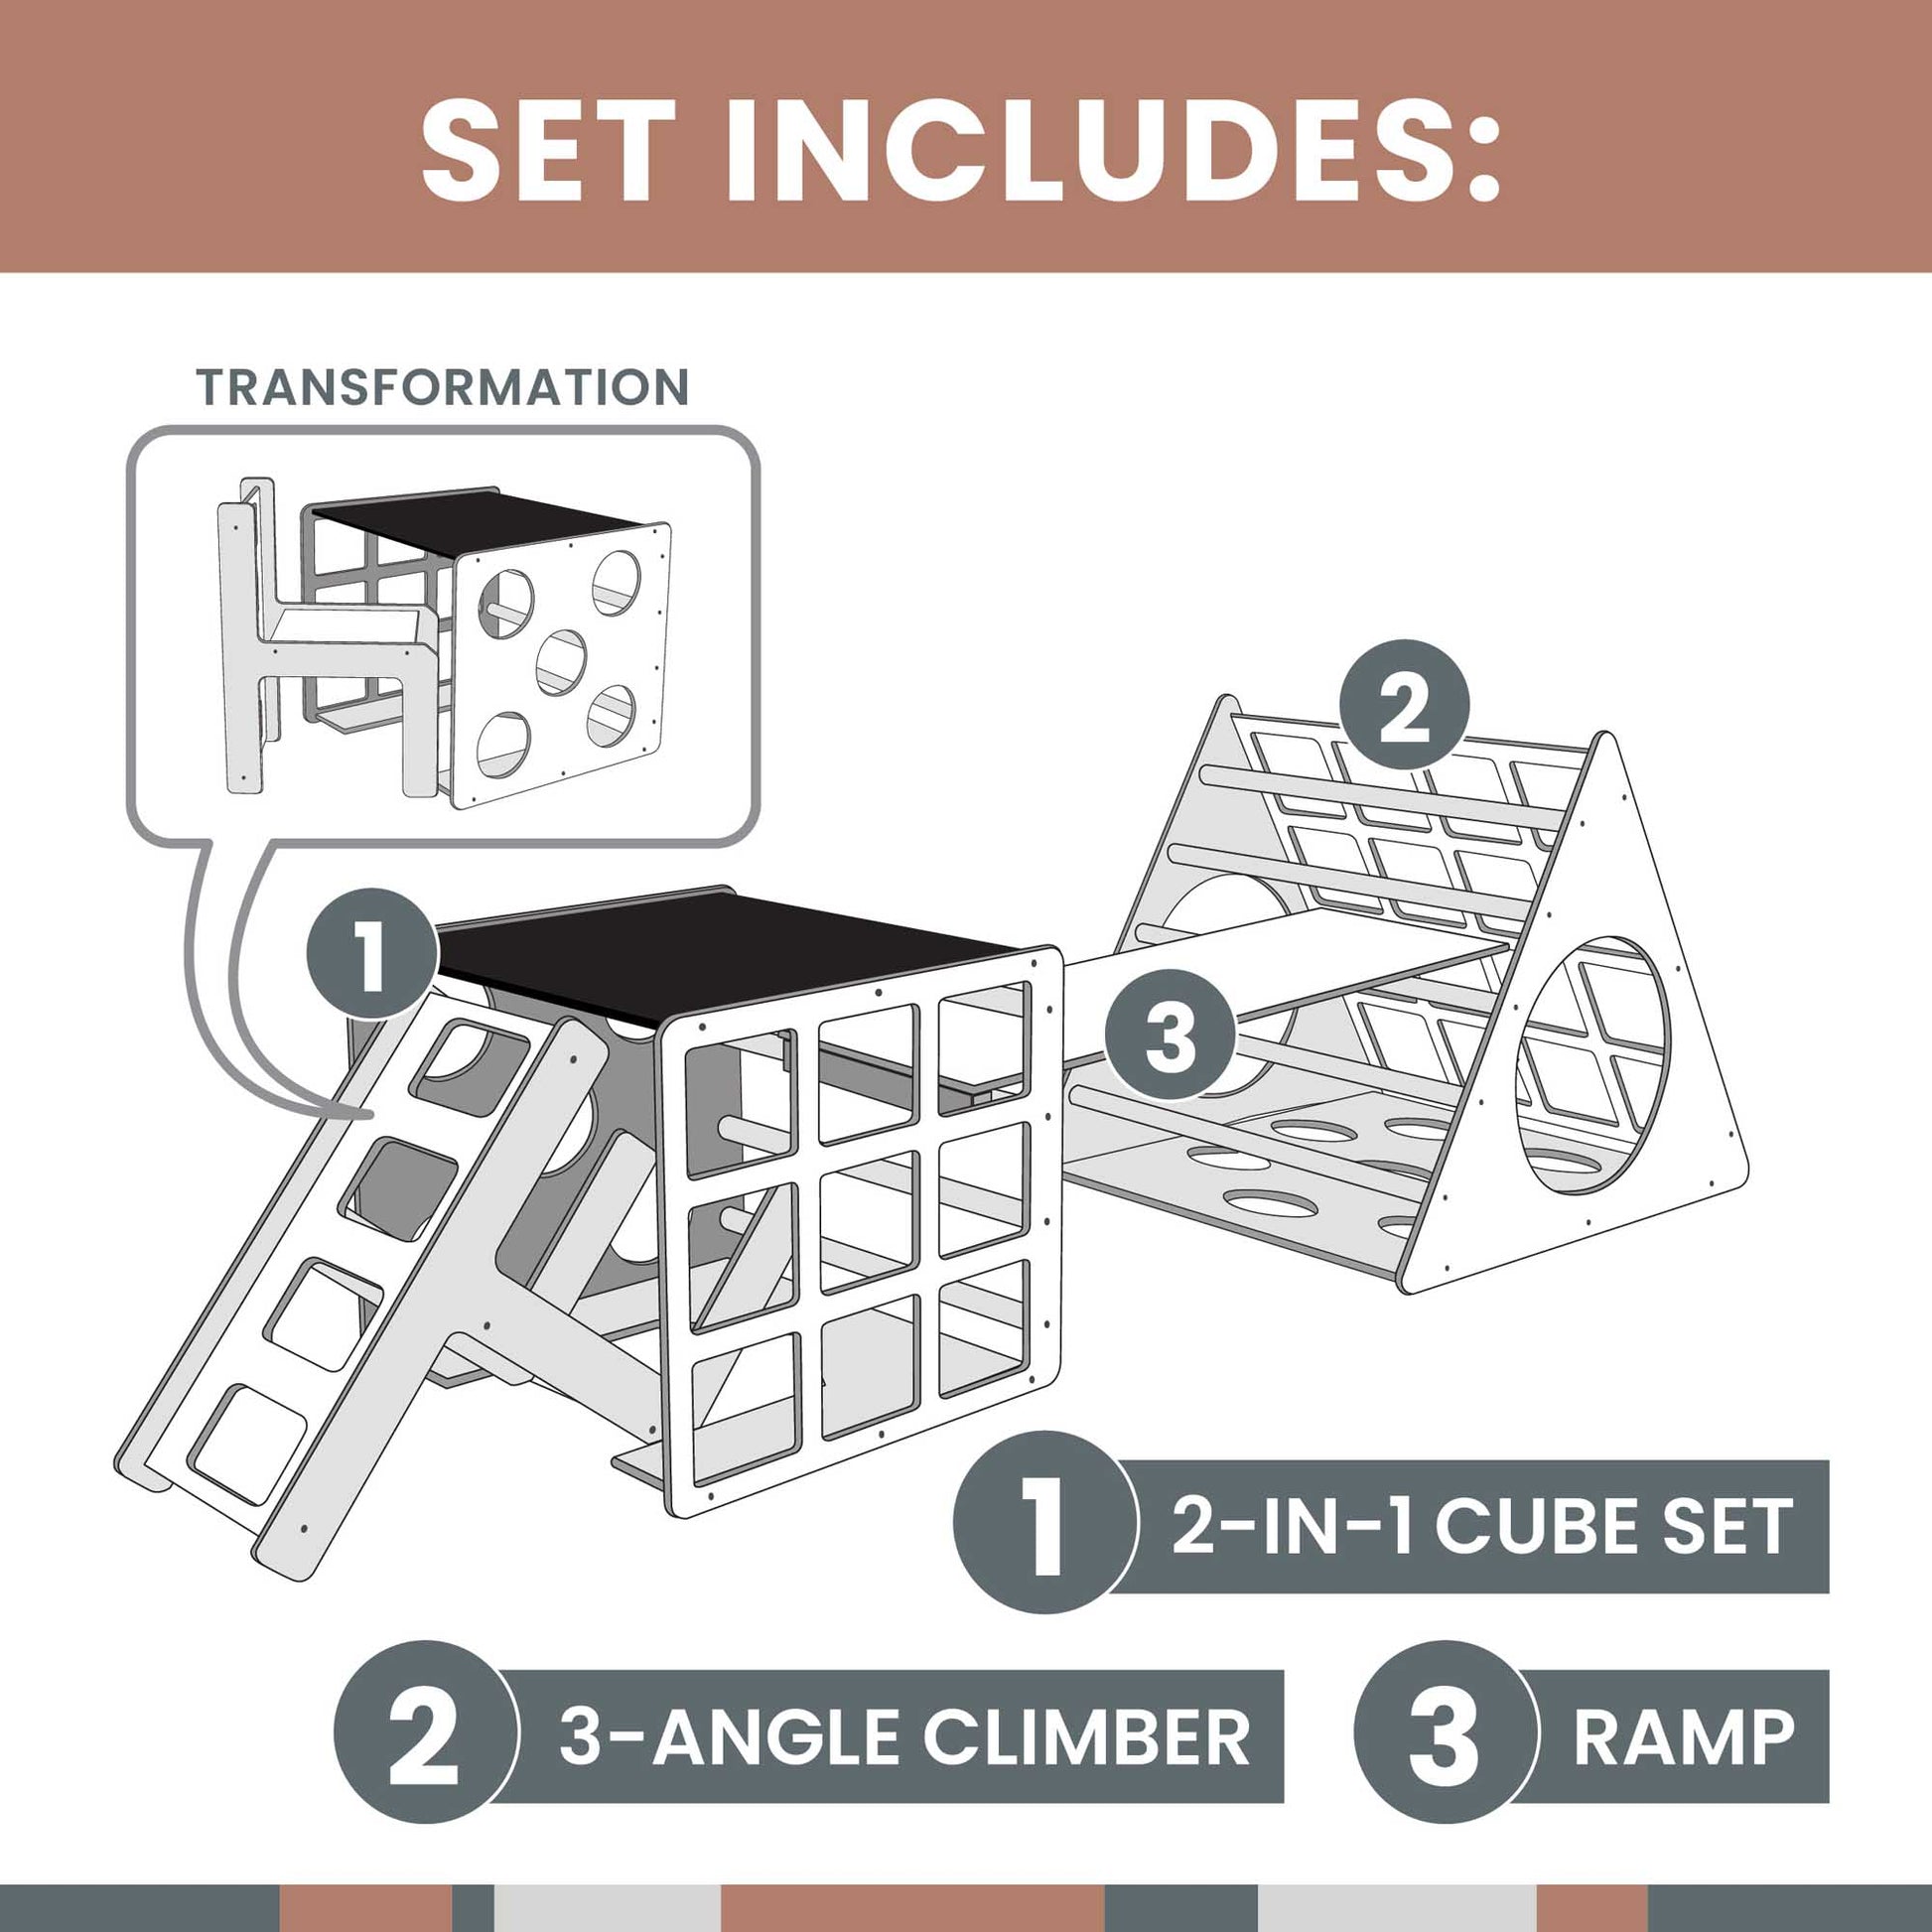 A set of instructions for building a climbing triangle + 2-in-1 climbing cube / table and chair + a ramp.